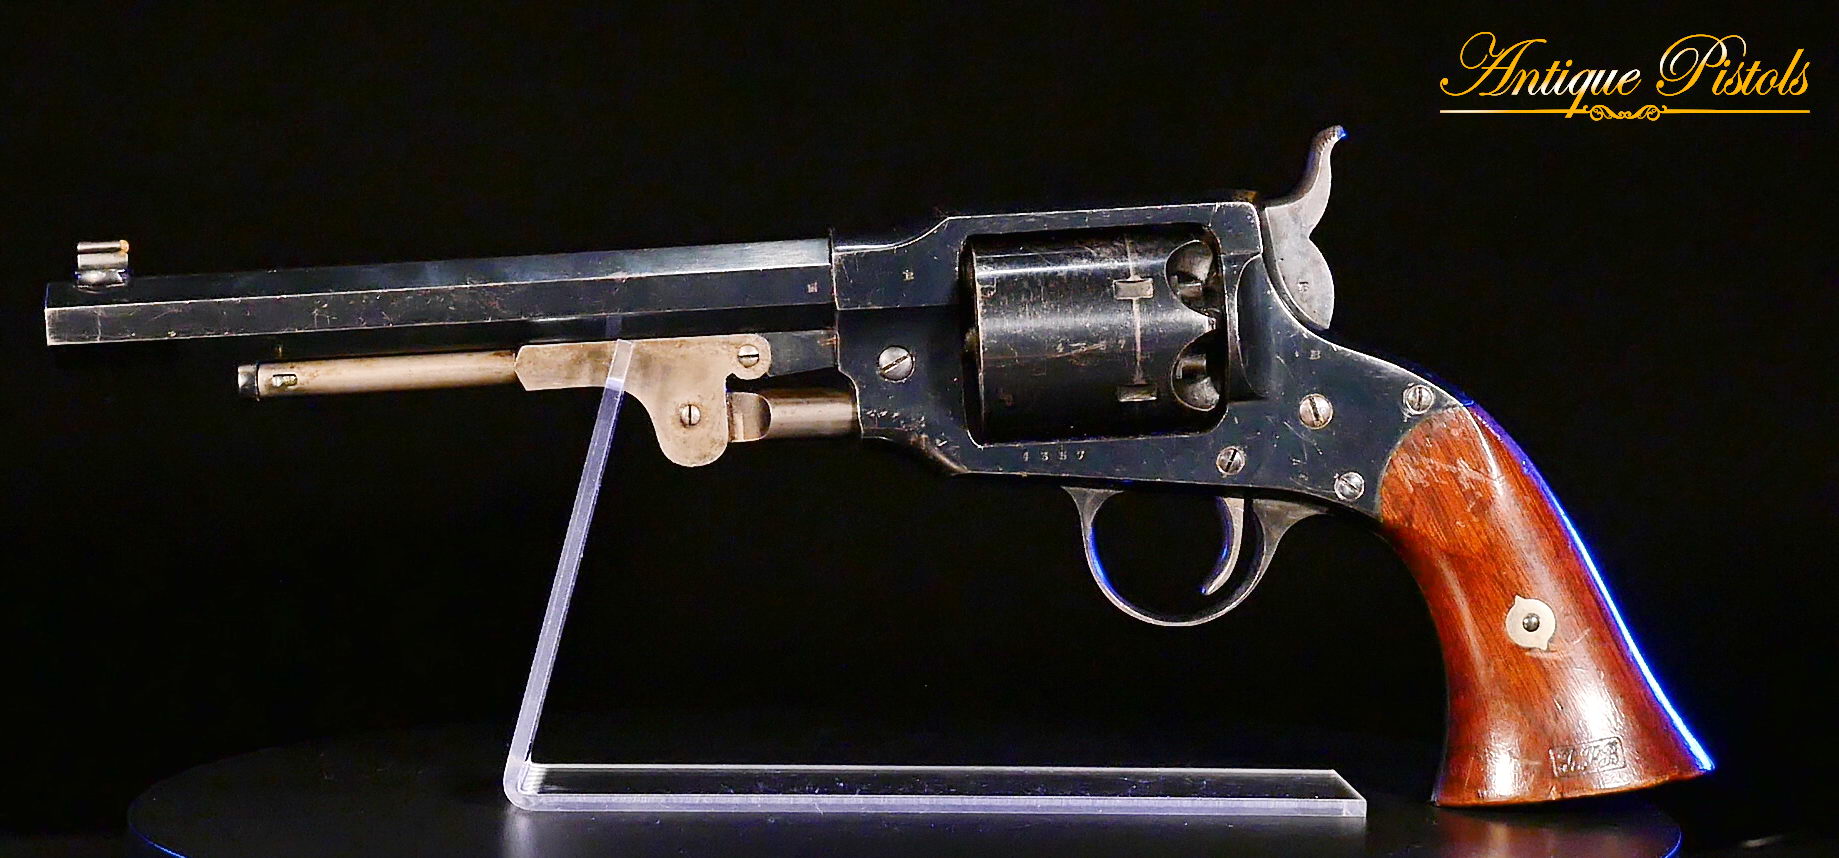 Rogers & Spencer Army - Antique Pistols